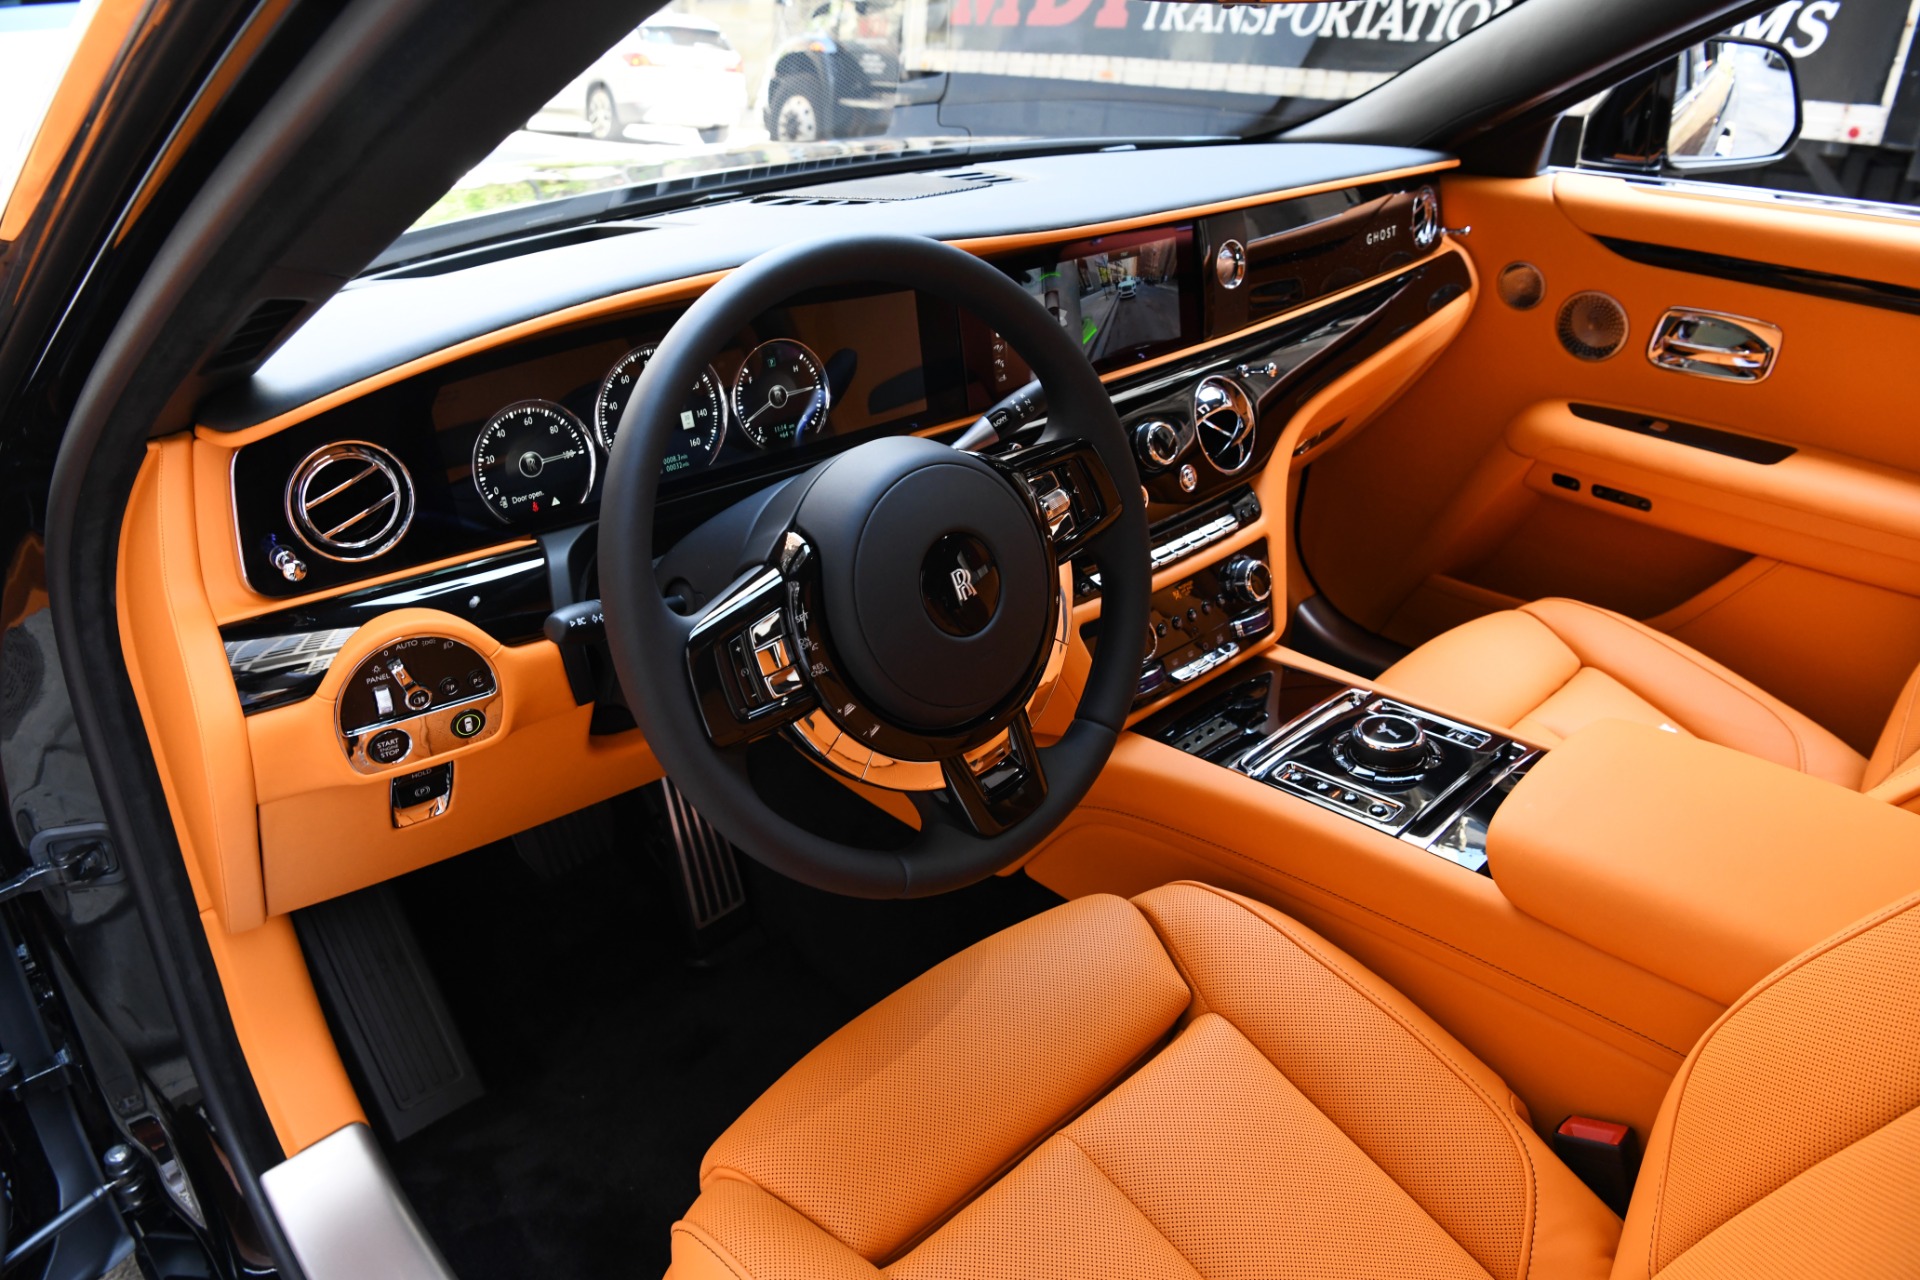 2021 Rolls Royce Ghost Extended Interior  Beautiful in its details   YouTube